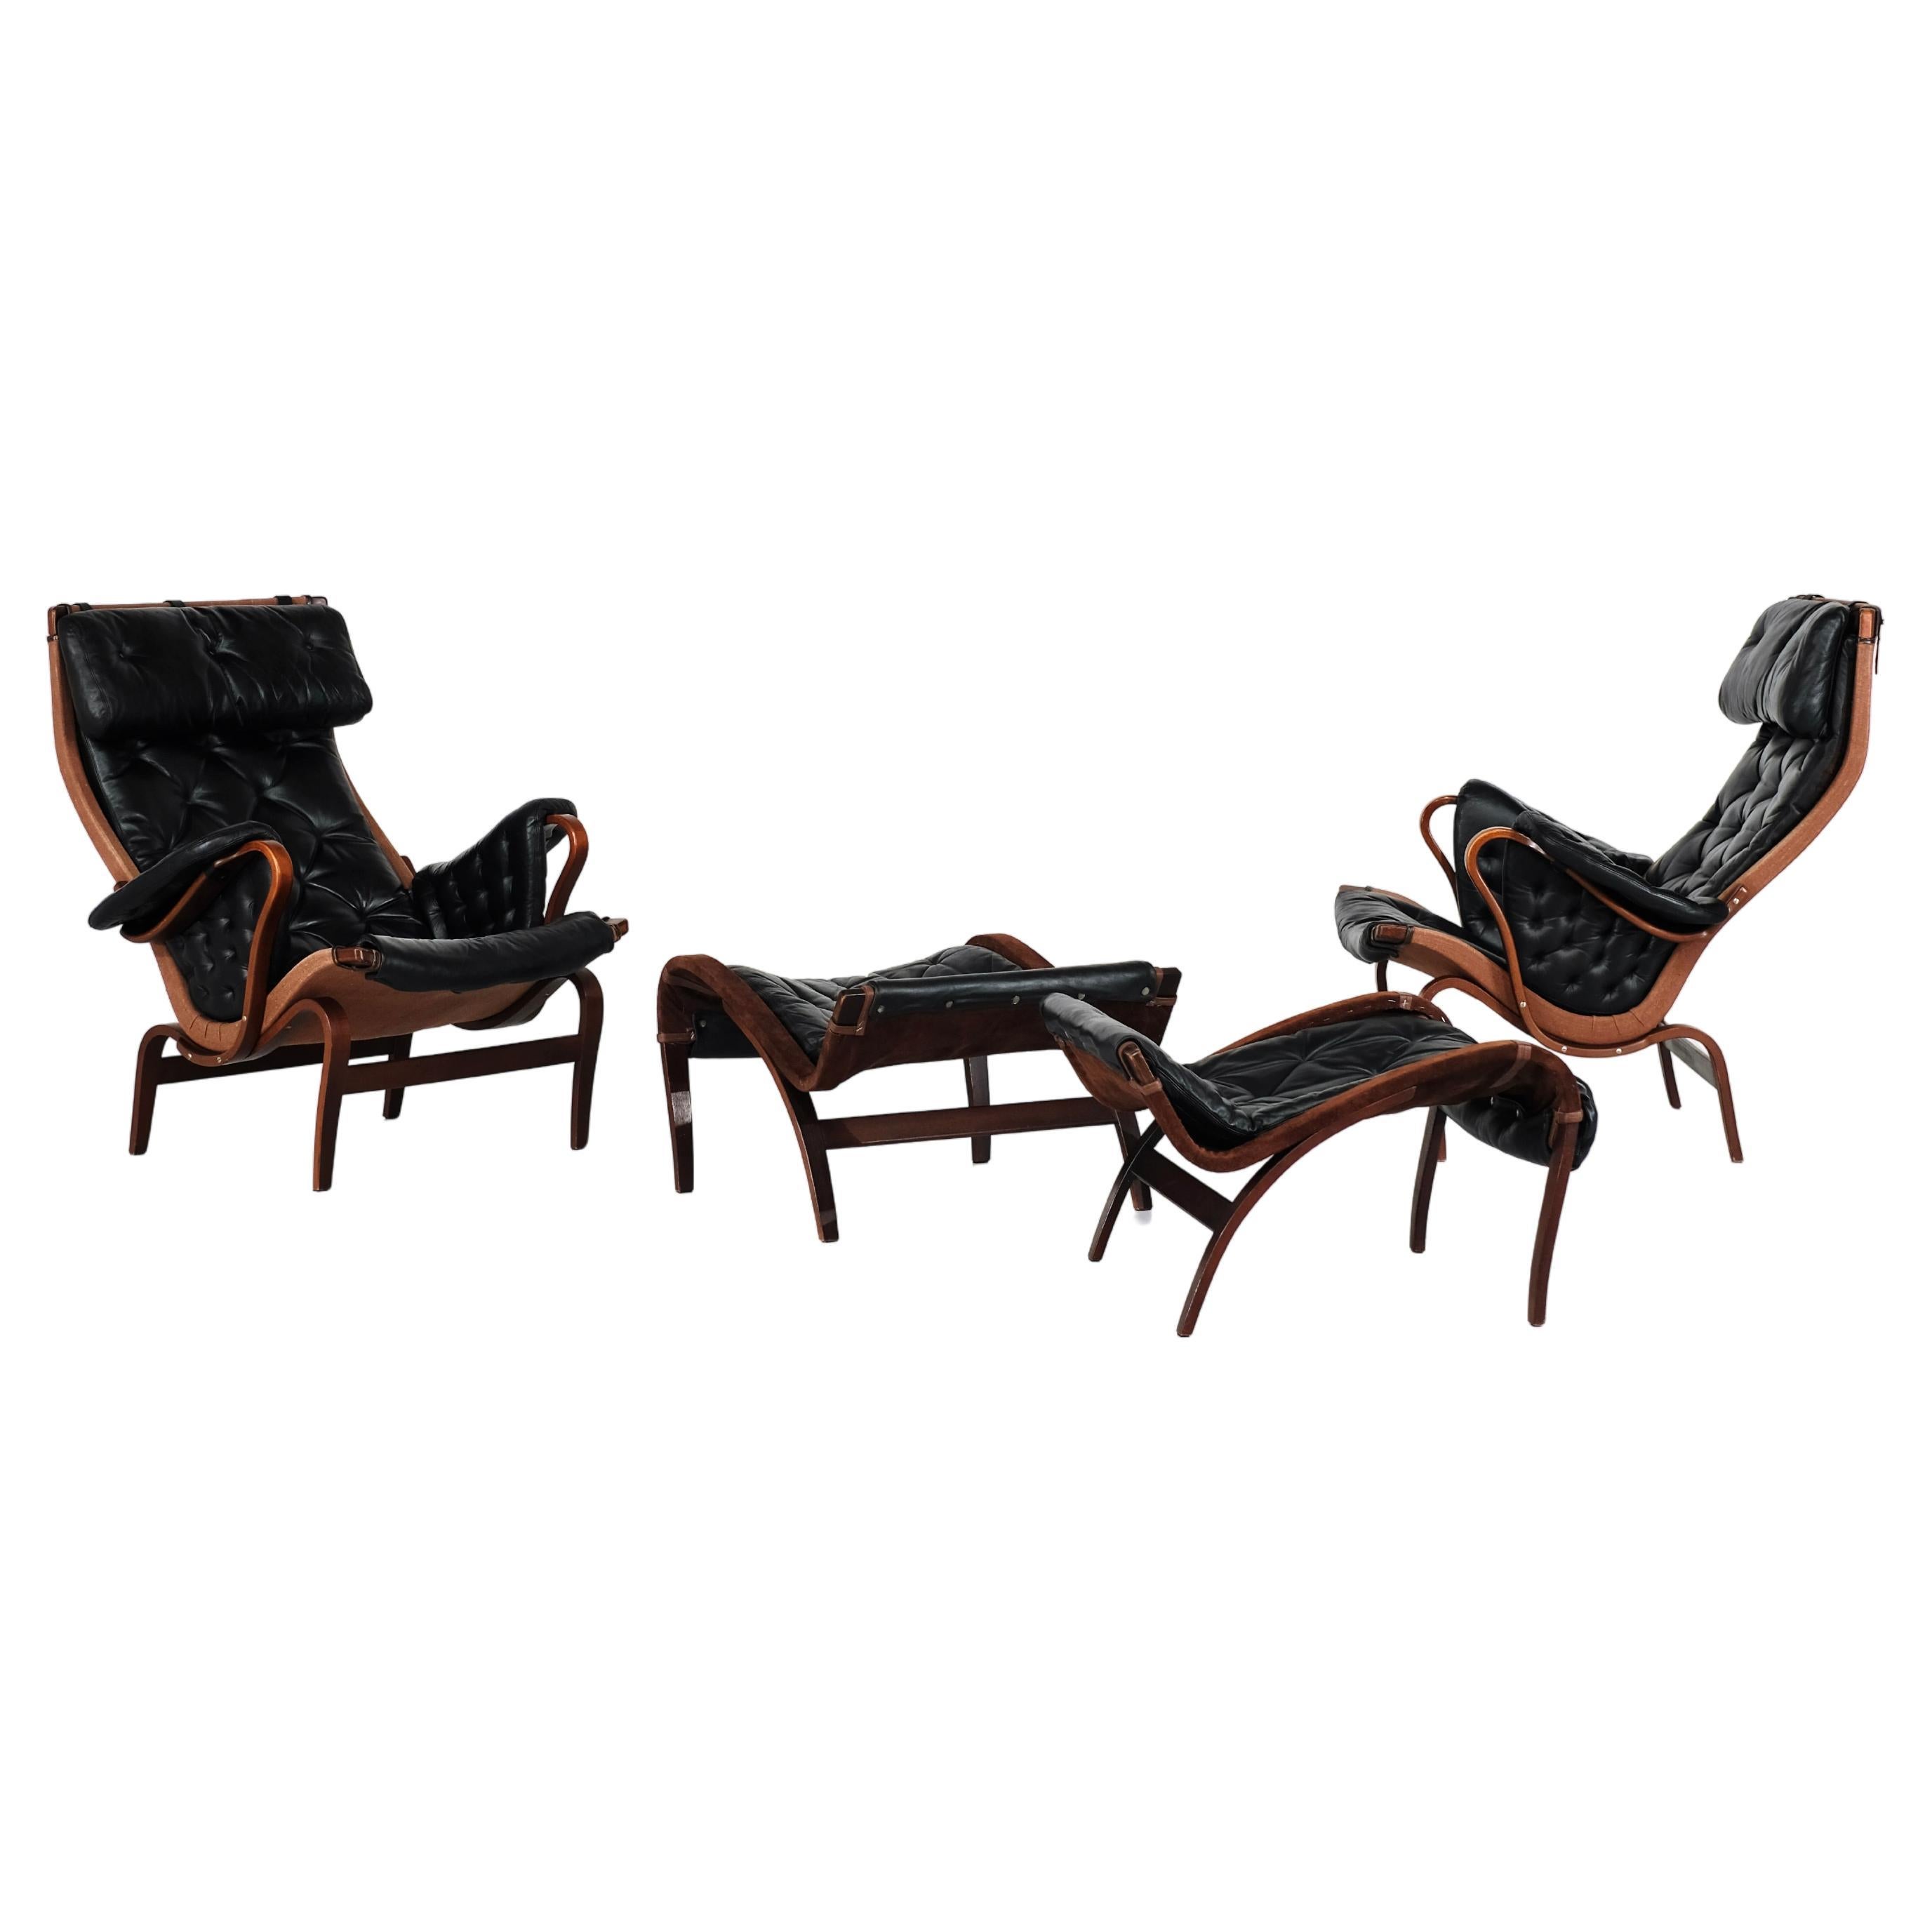 Pair of Armchairs "Pernilla 69" by Bruno Mathsson for Dux, Sweden 1969. For Sale